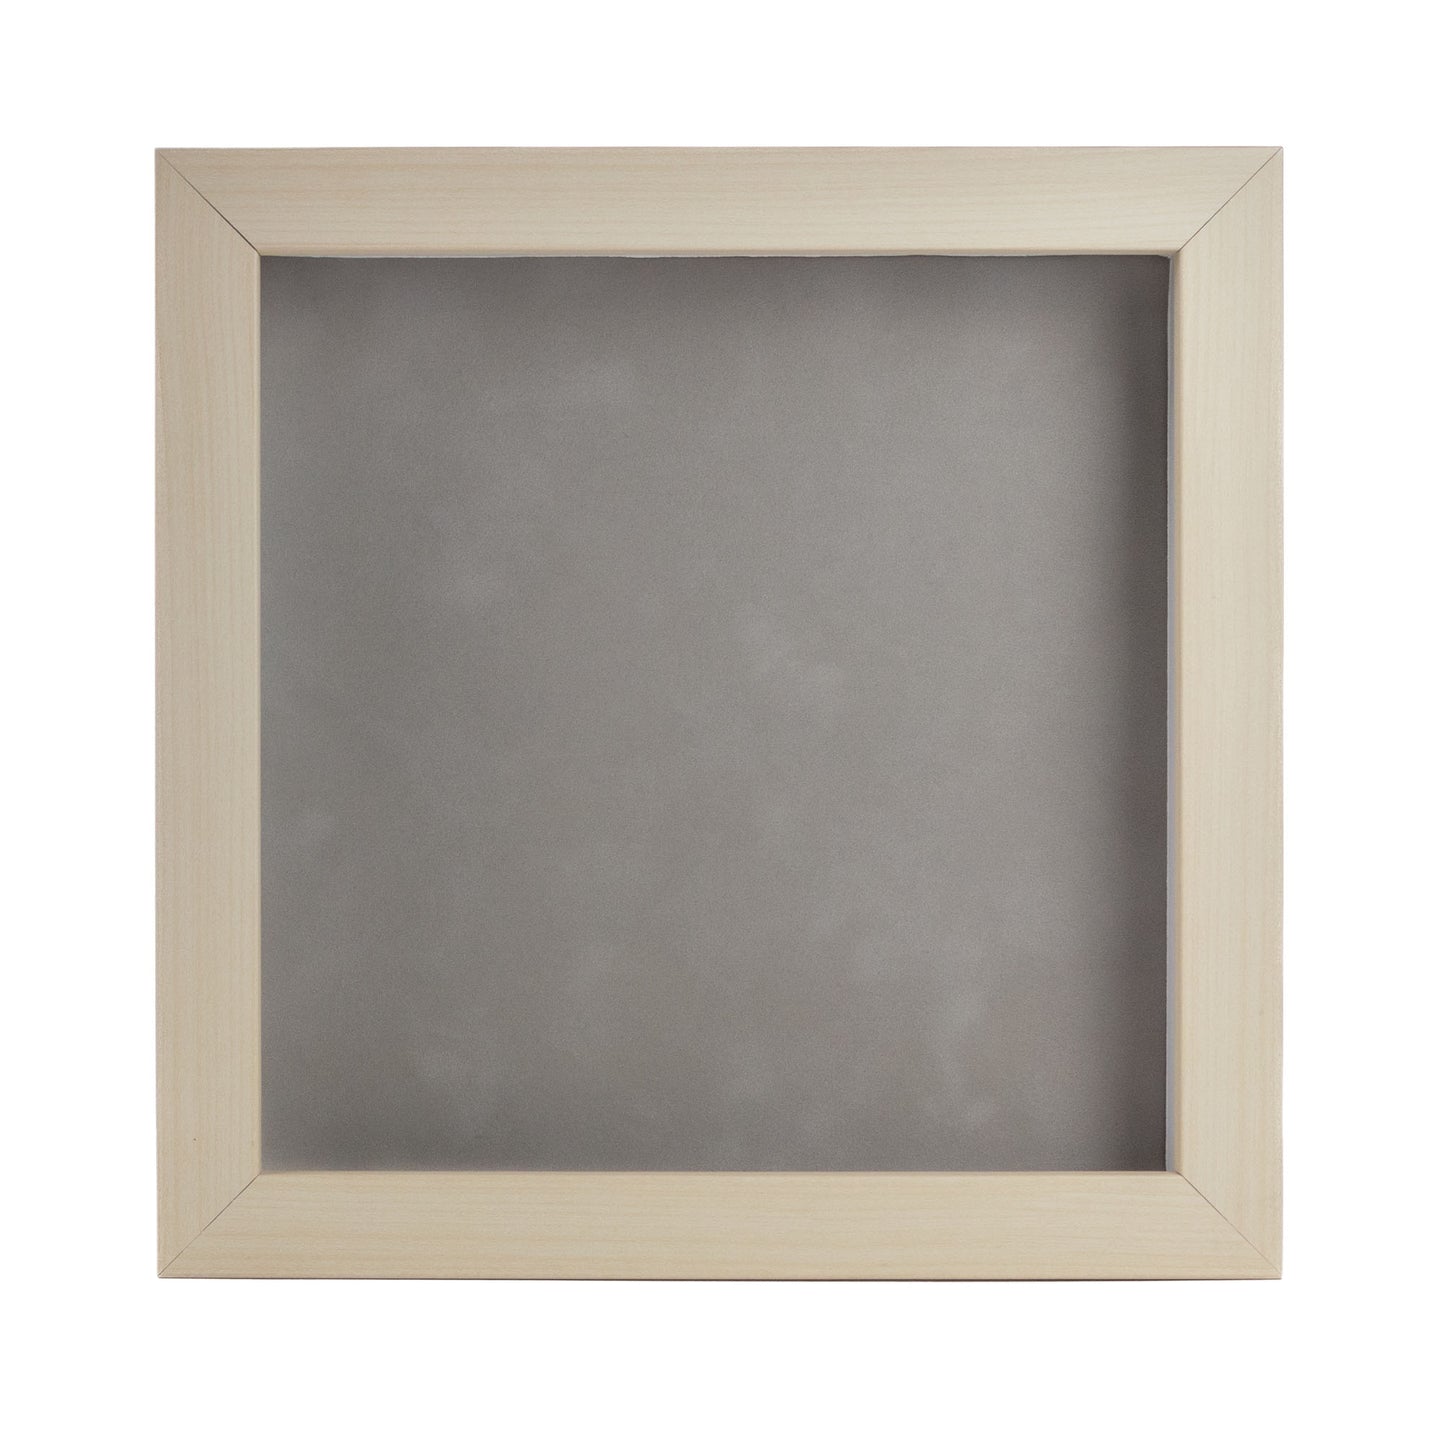 White Washed Shadow Box Frame With Light Grey Acid-Free Suede Backing